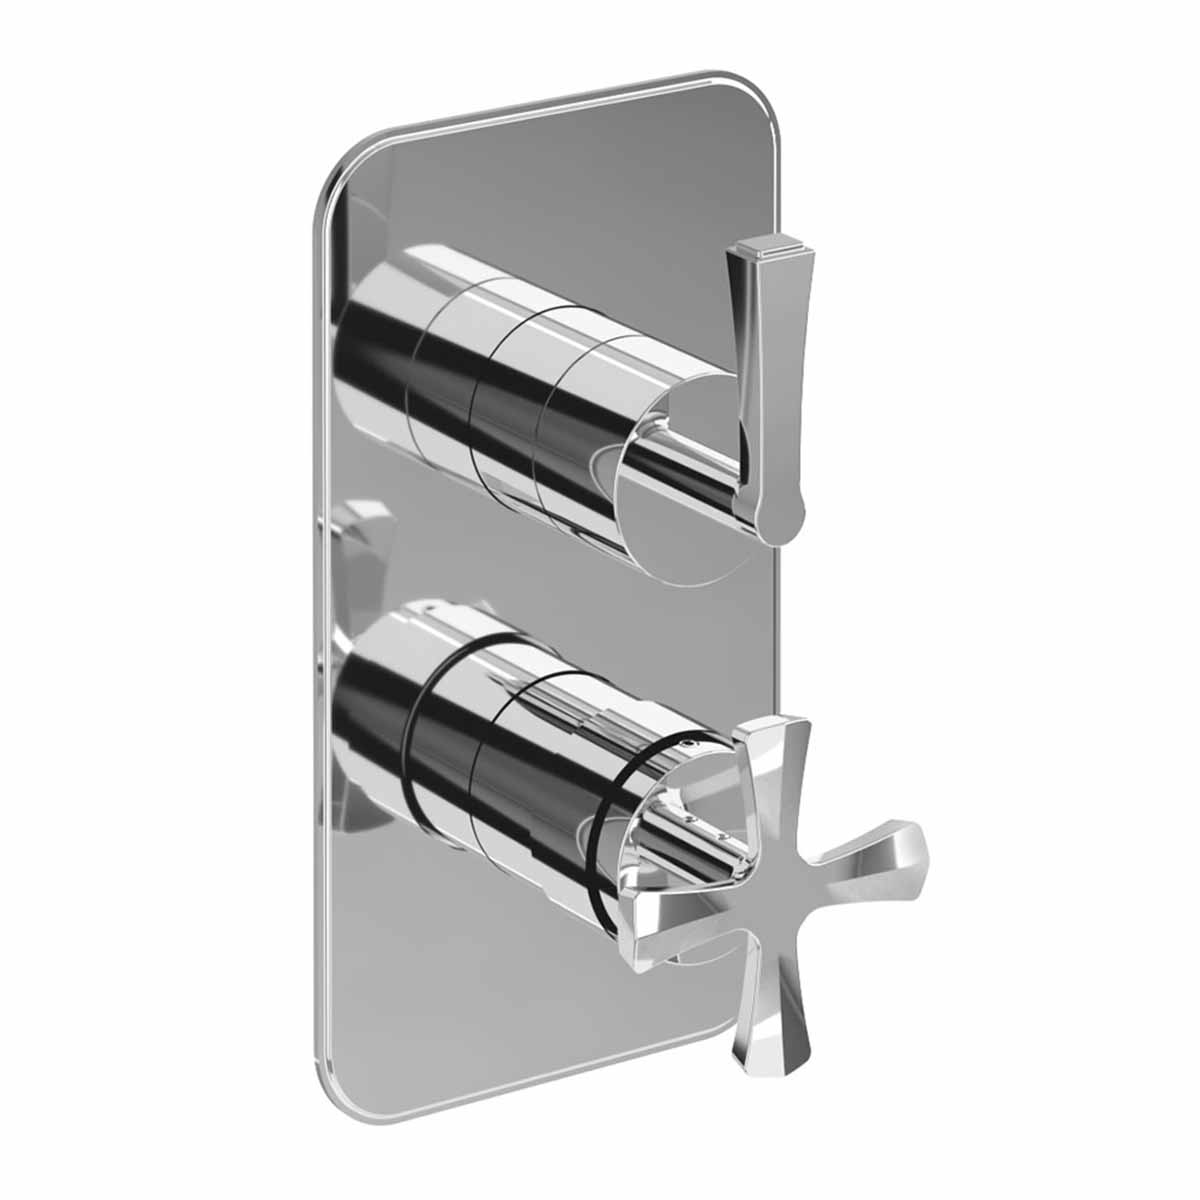 Burlington Riviera Shower Valve With Wall Mounted Fixed Overhead Chrome Deluxe Bathrooms UK